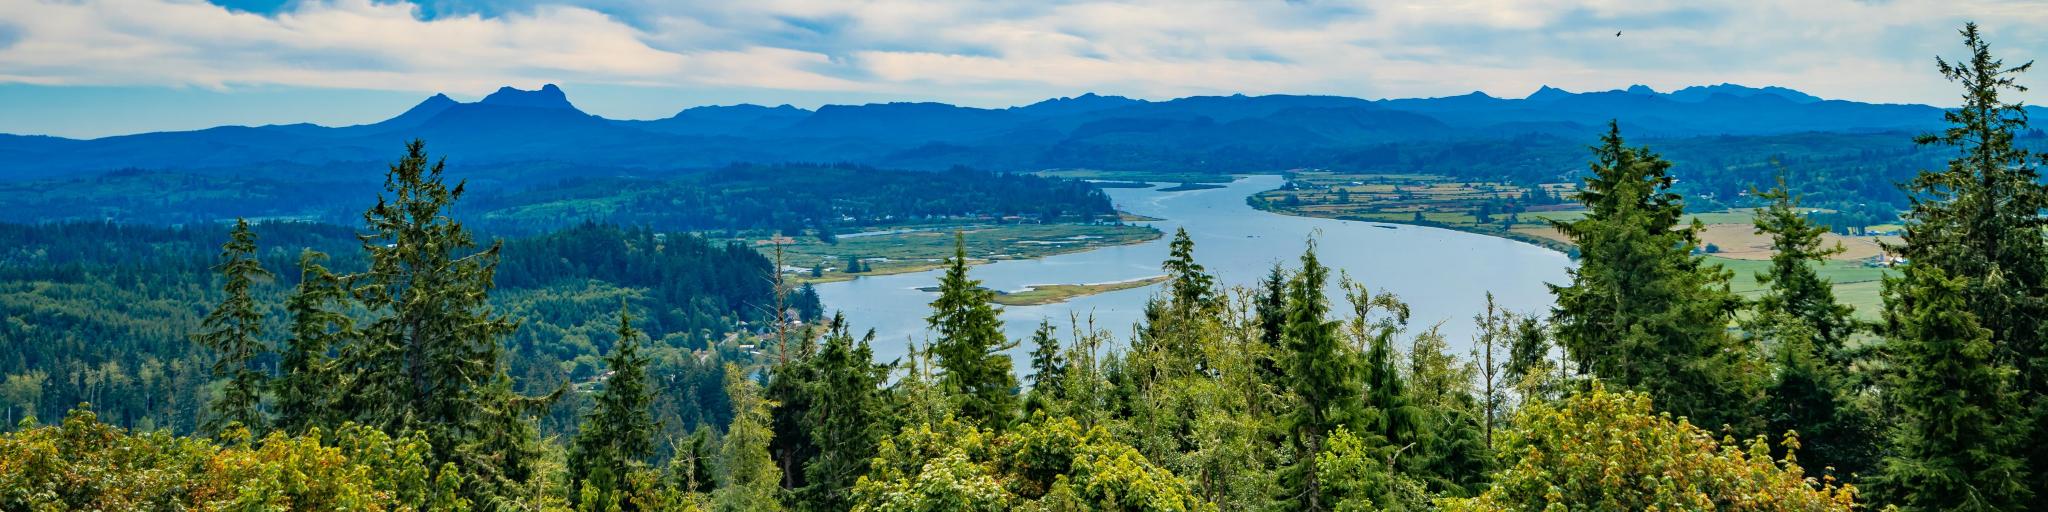 Panoramic view of Youngs River from Coxcomb Hill, Astoria, Oregon, with lush greenery and farmland set against a mountain backdrop